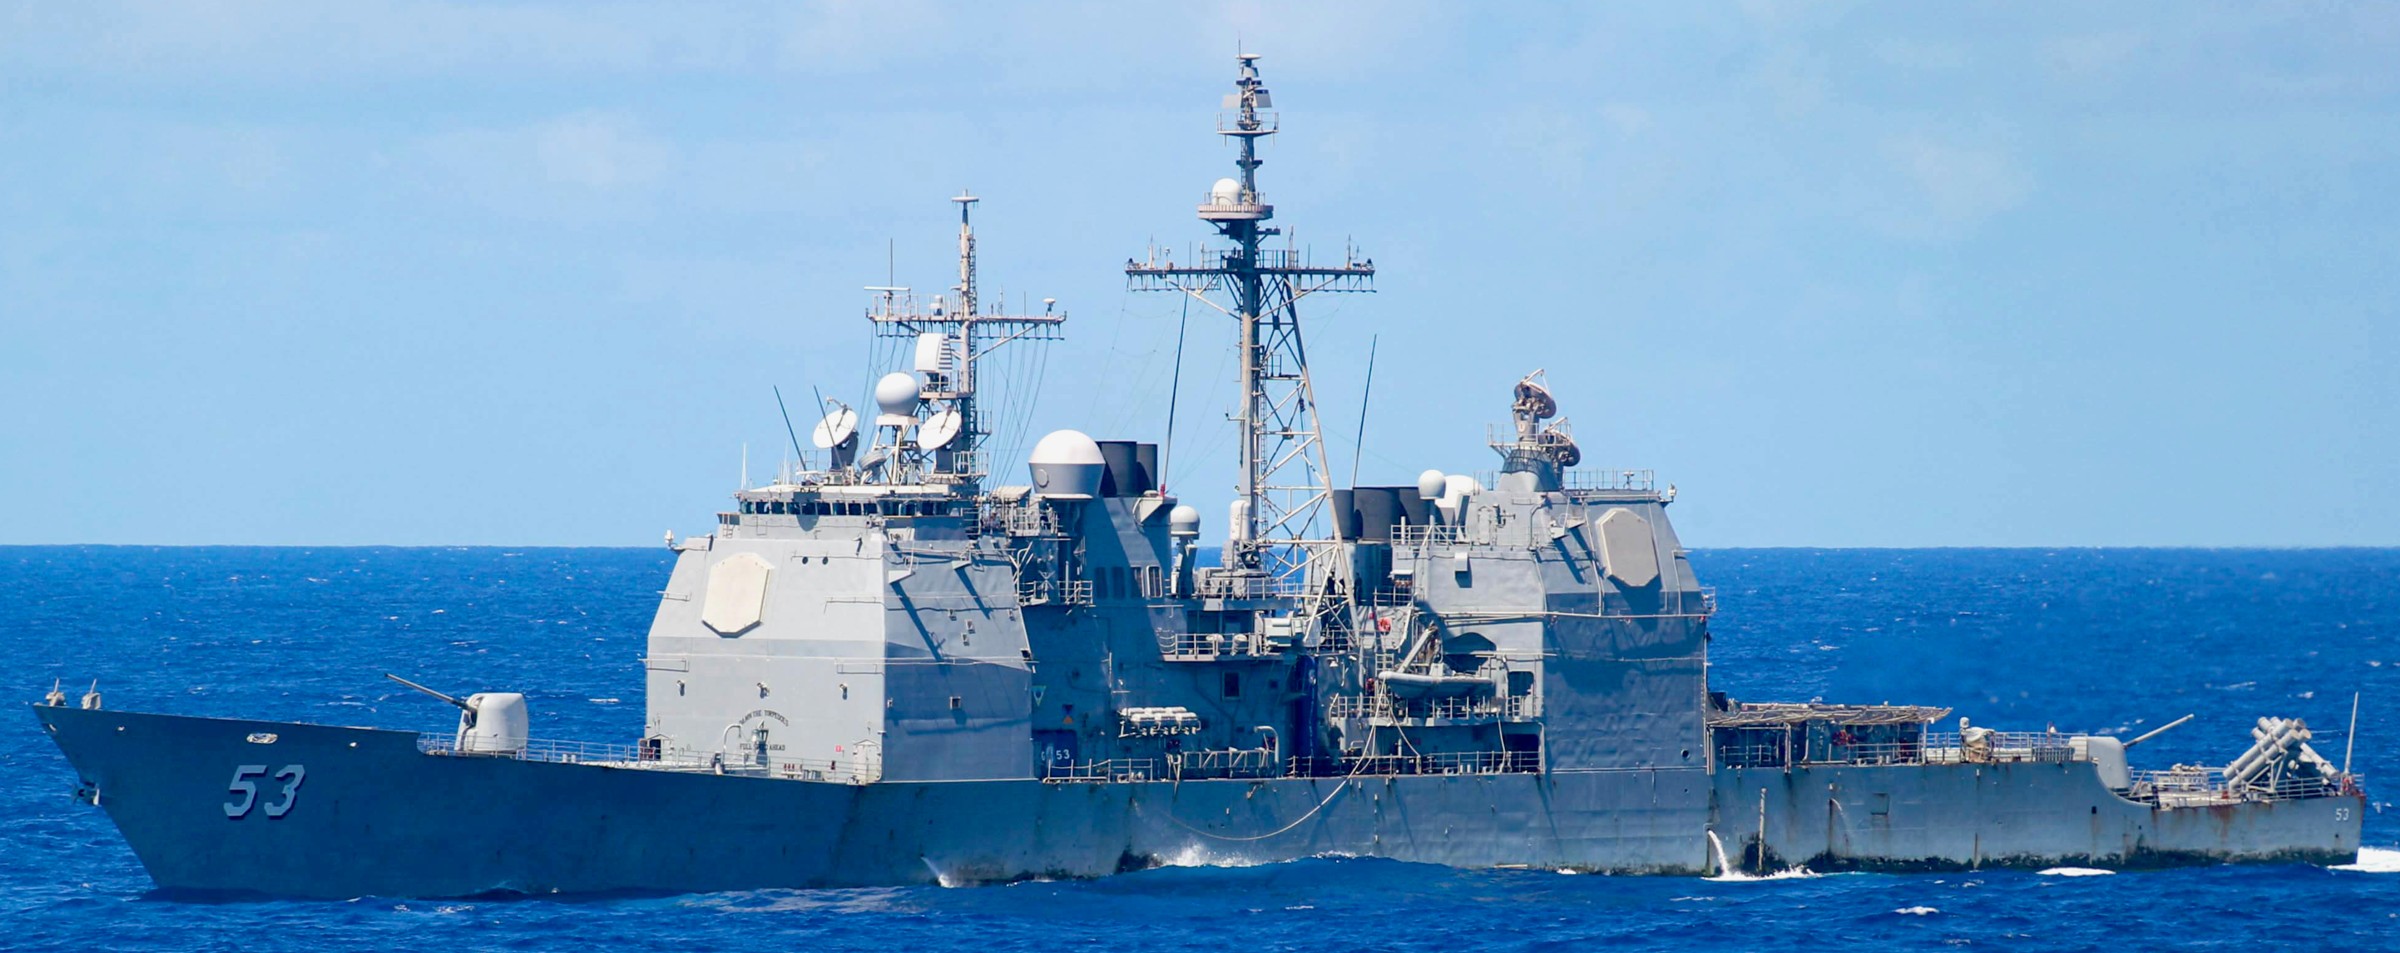 cg-53 uss mobile bay ticonderoga class guided missile cruiser aegis us navy pacific ocean 150